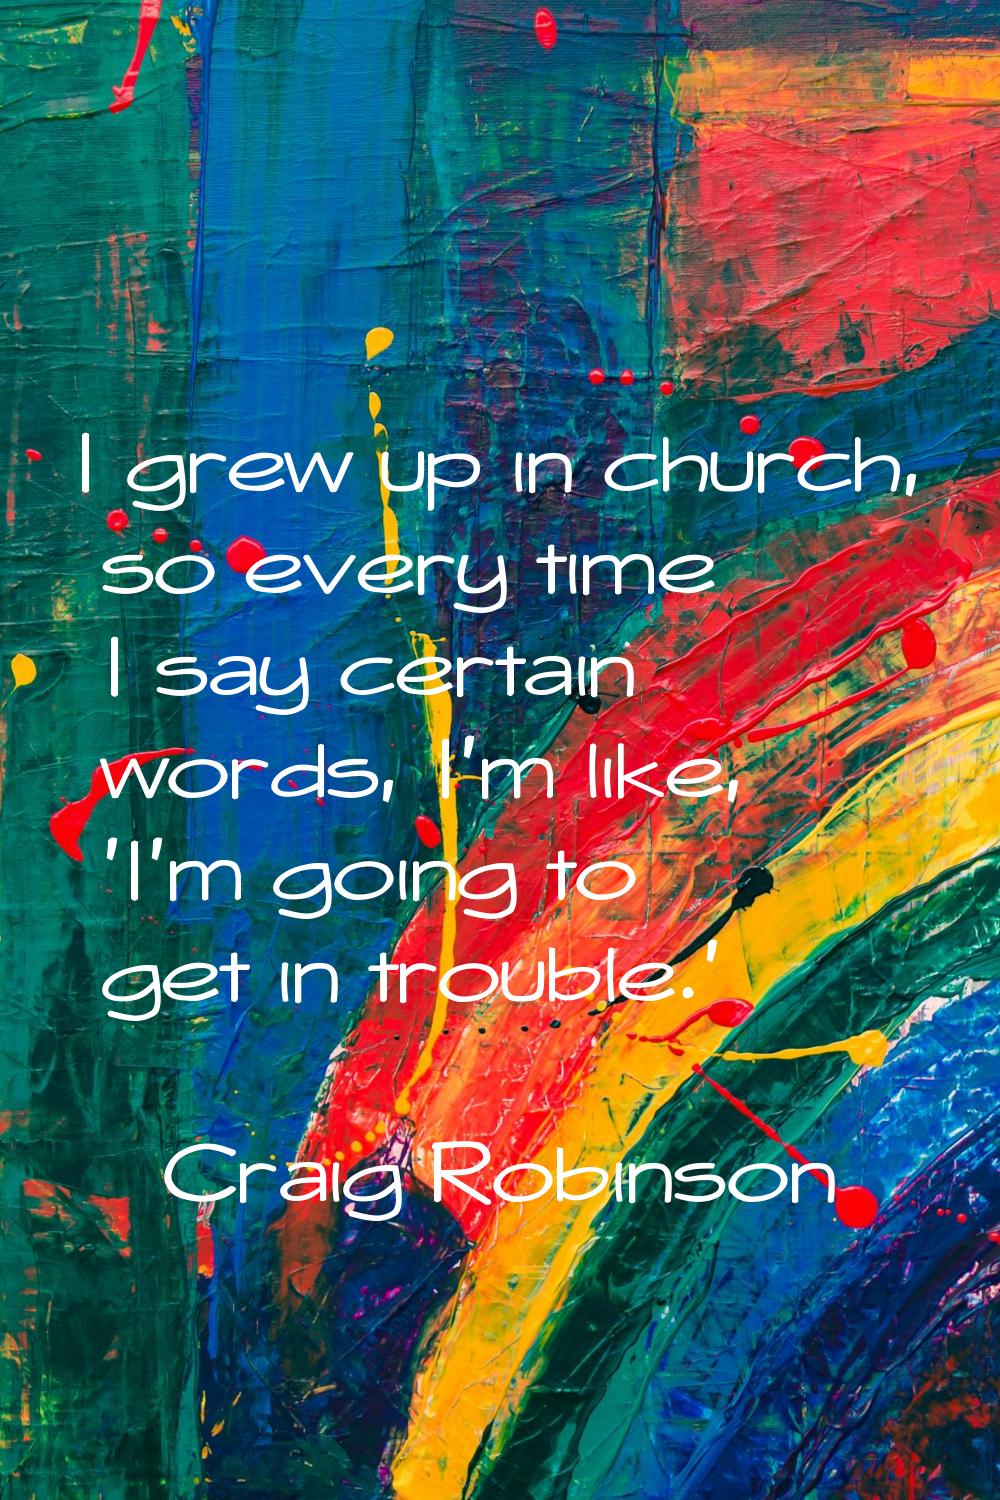 I grew up in church, so every time I say certain words, I'm like, 'I'm going to get in trouble.'